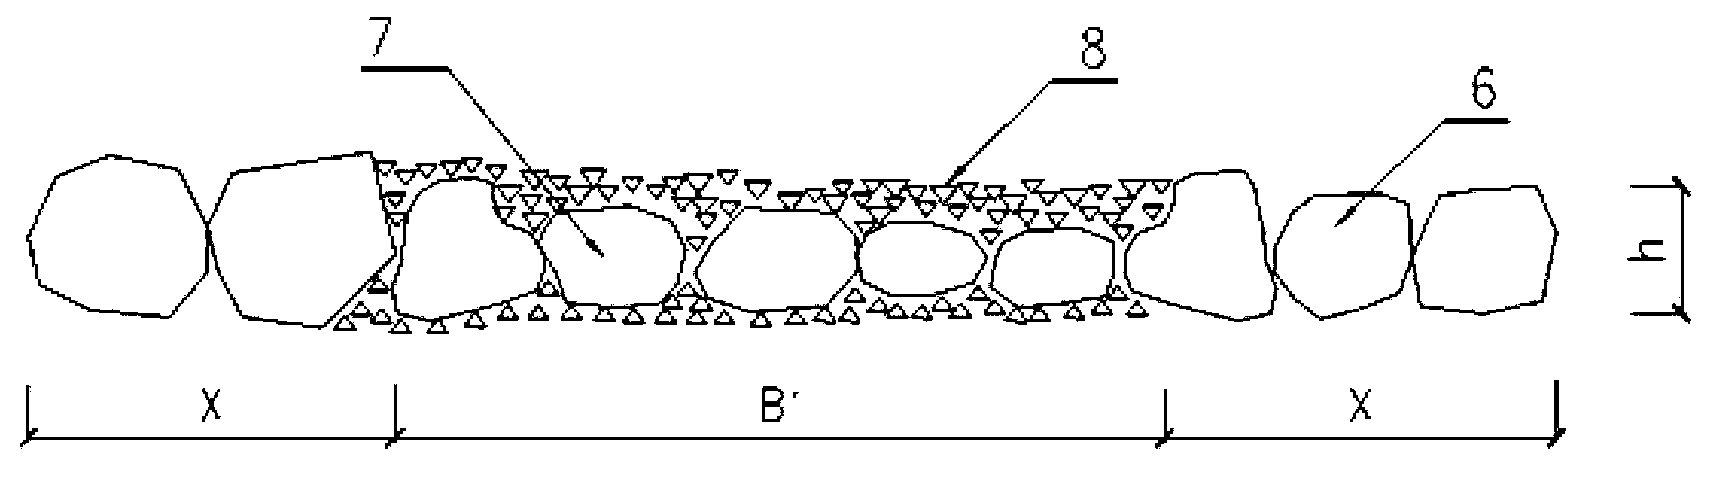 Method for constructing multi-thickness rockfill embankment with lateral confinement and layering functions